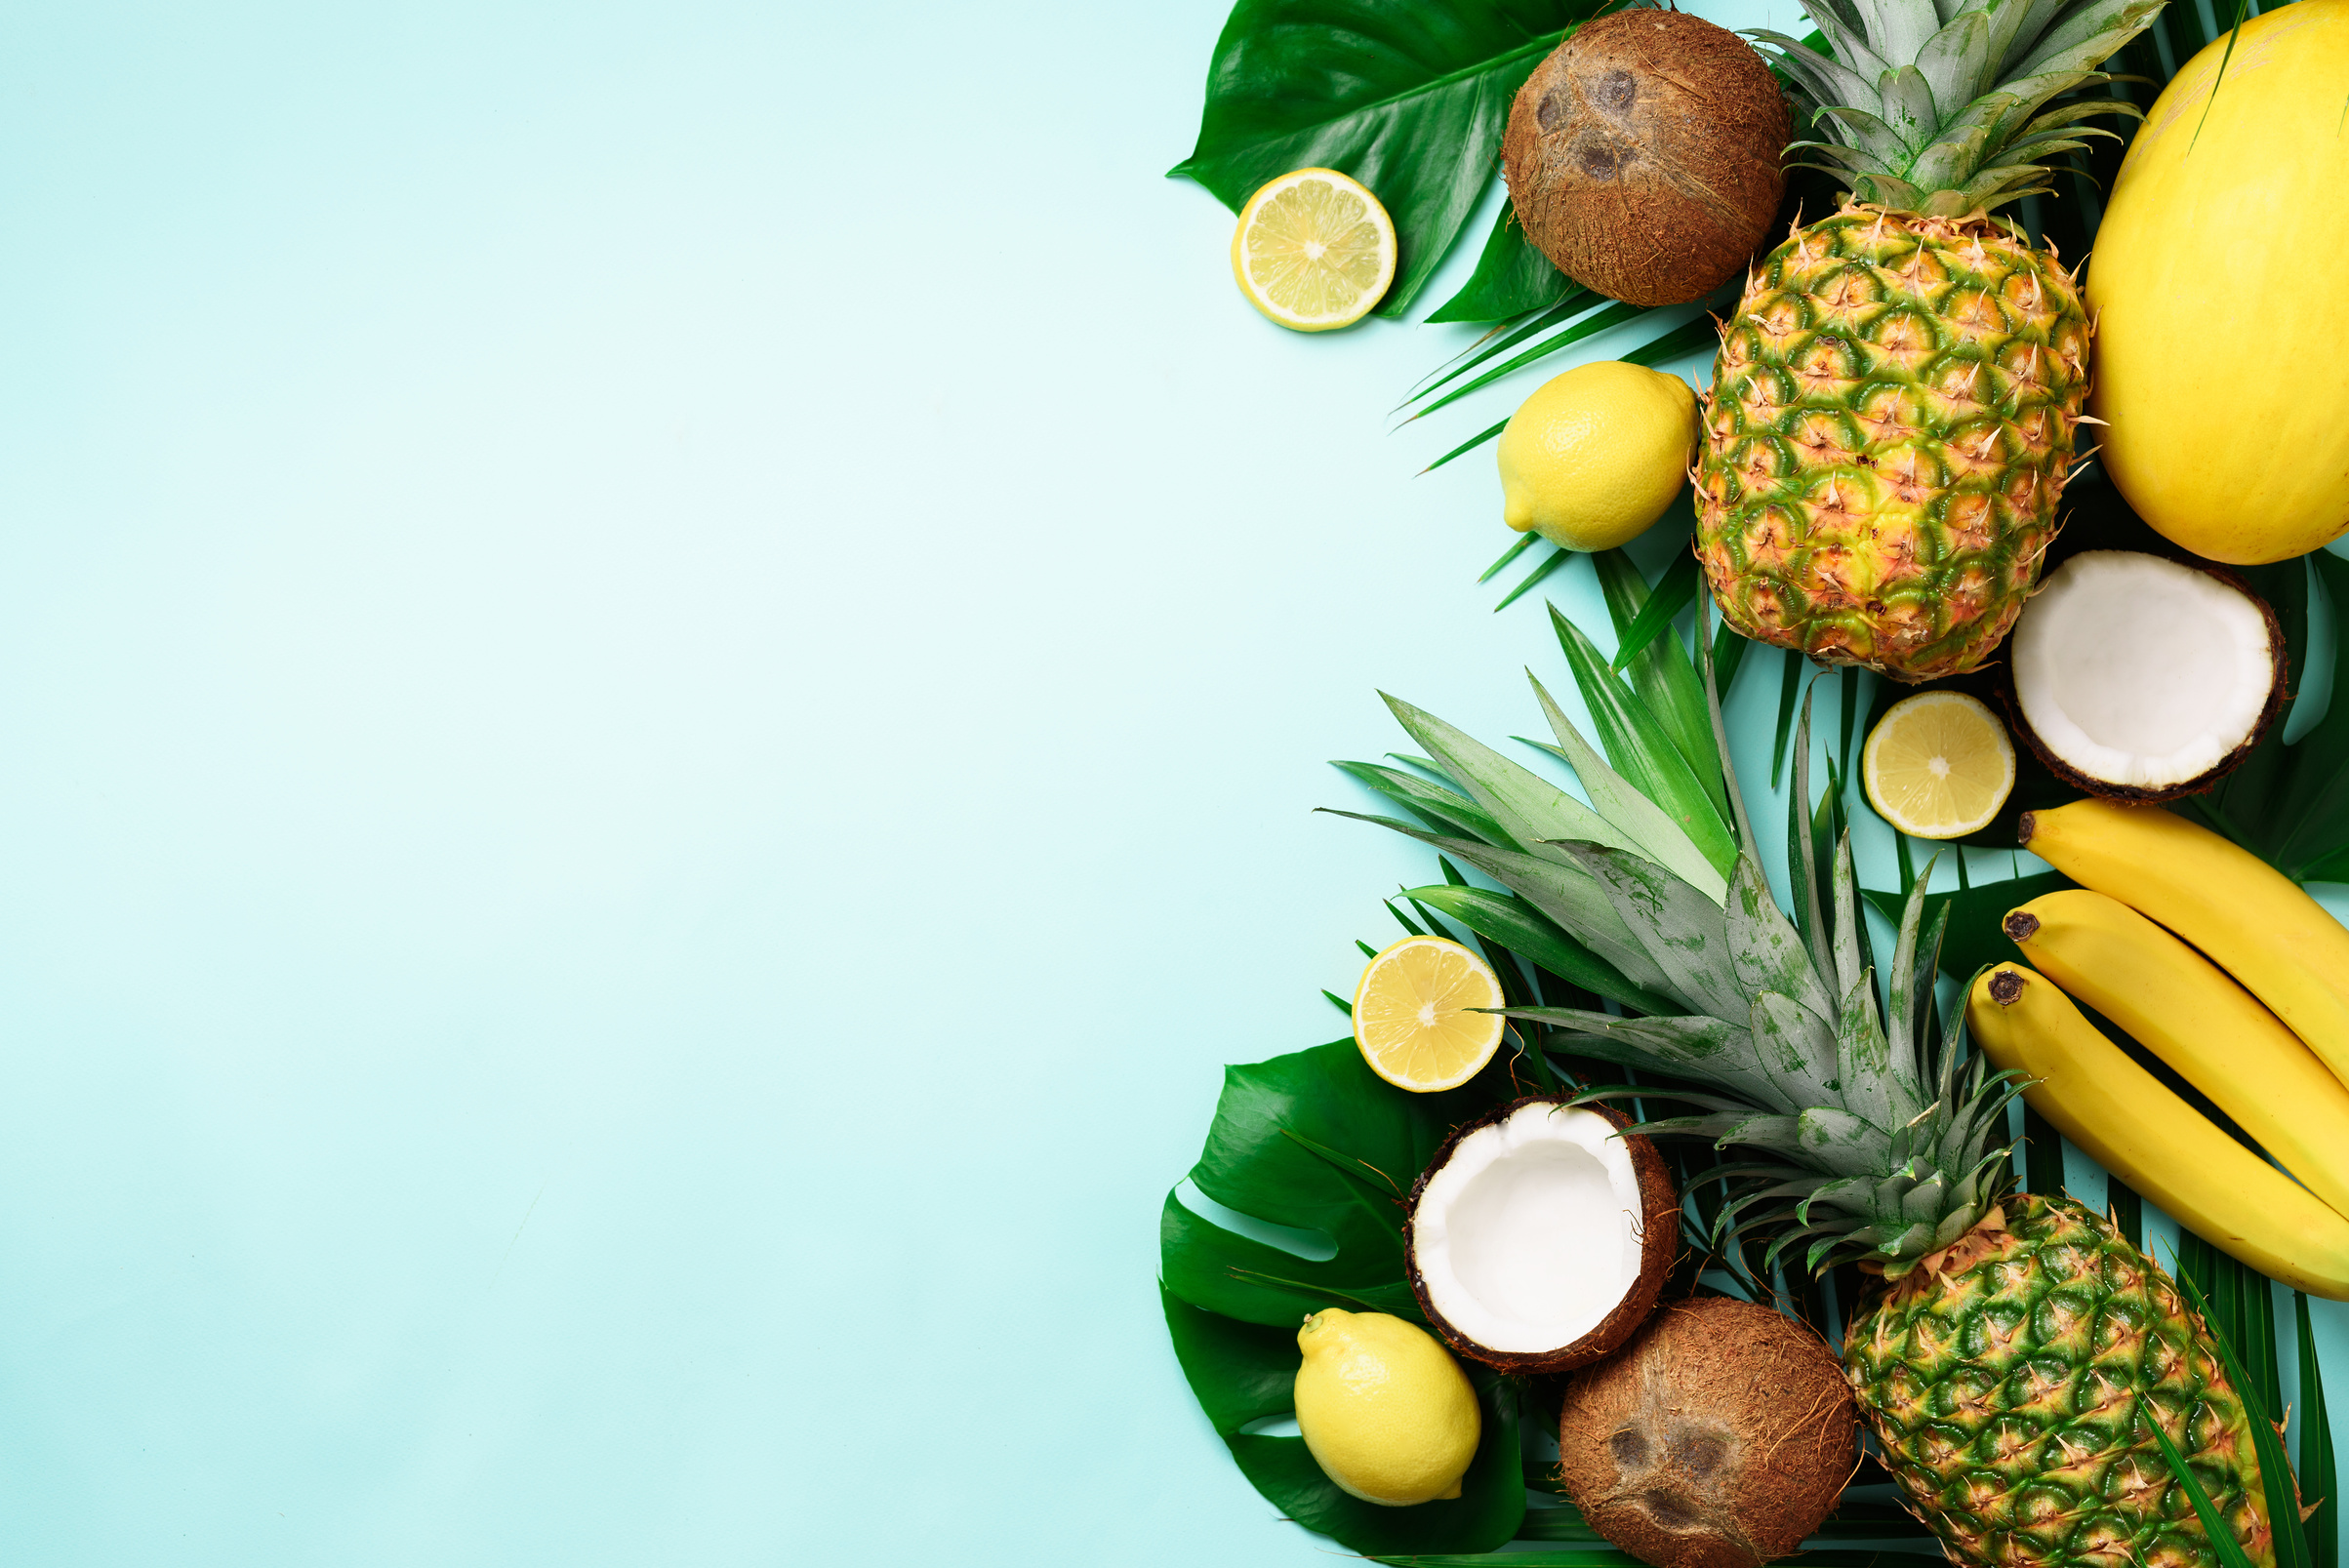 Exotic Pineapples, Ripe Coconuts, Banana, Melon, Lemon, Tropical Palm and Green Monstera Leaves on Blue Background with Copyspace for Your Text. Creative Layout. Summer Concept. Flat Lay, Top View